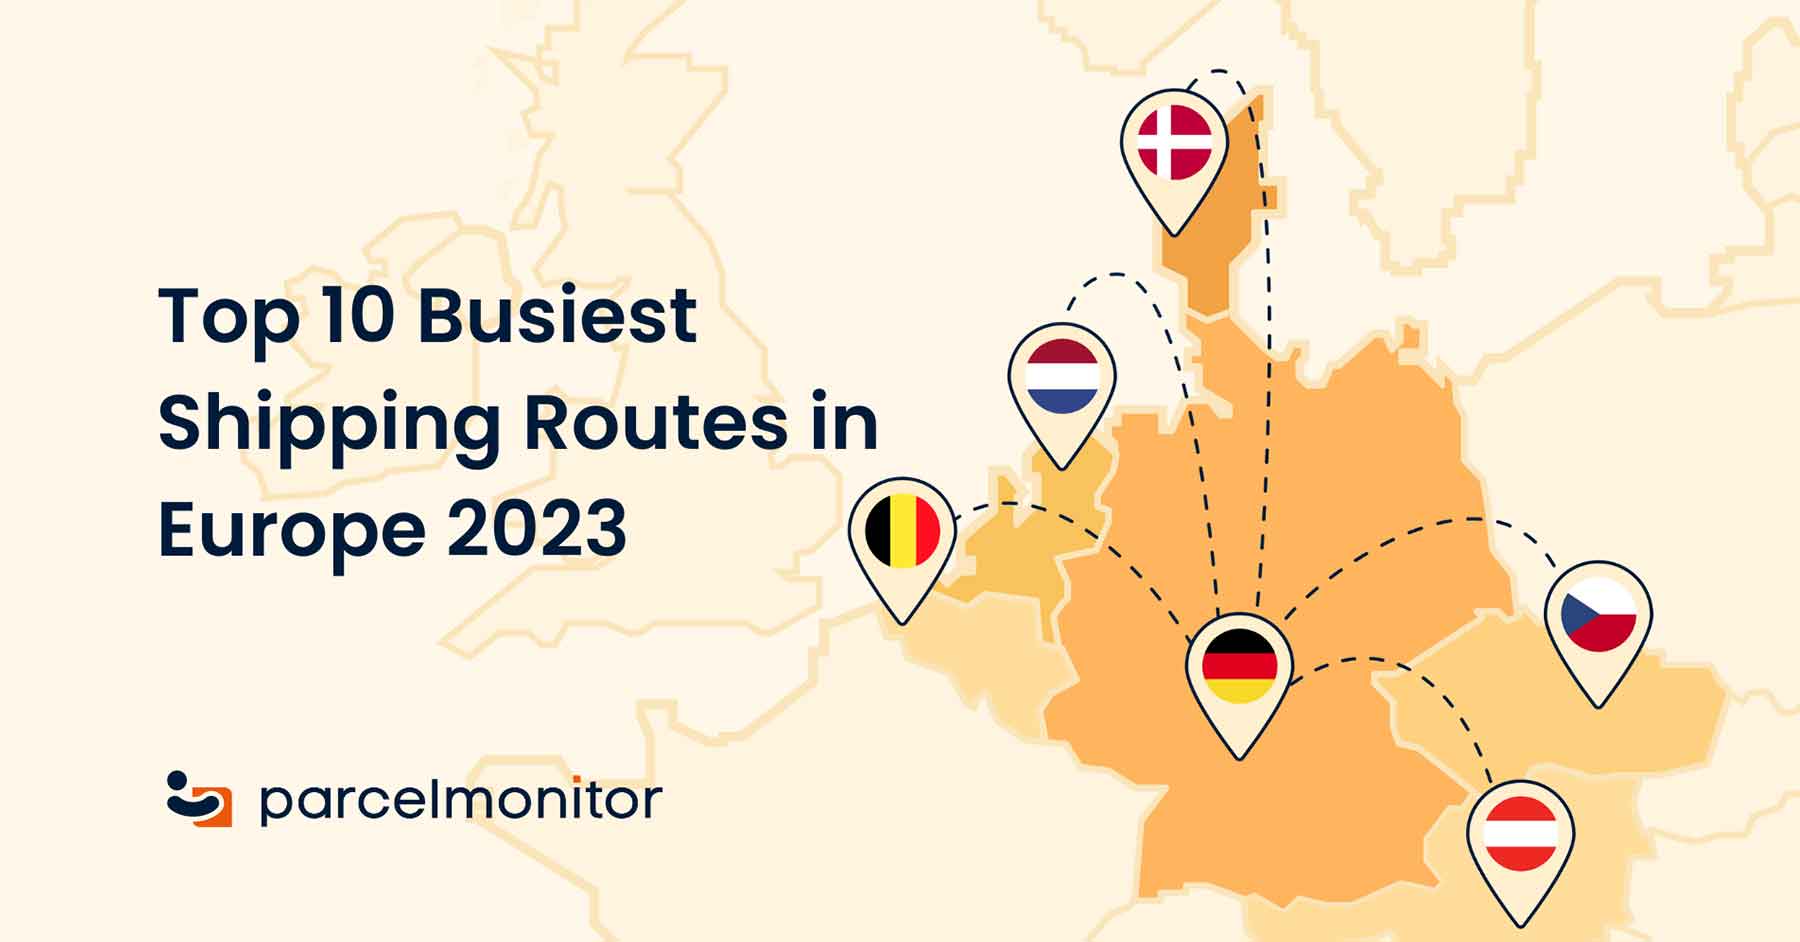 Article 115 Top 10 Busiest Shipping Routes In Europe 2023 